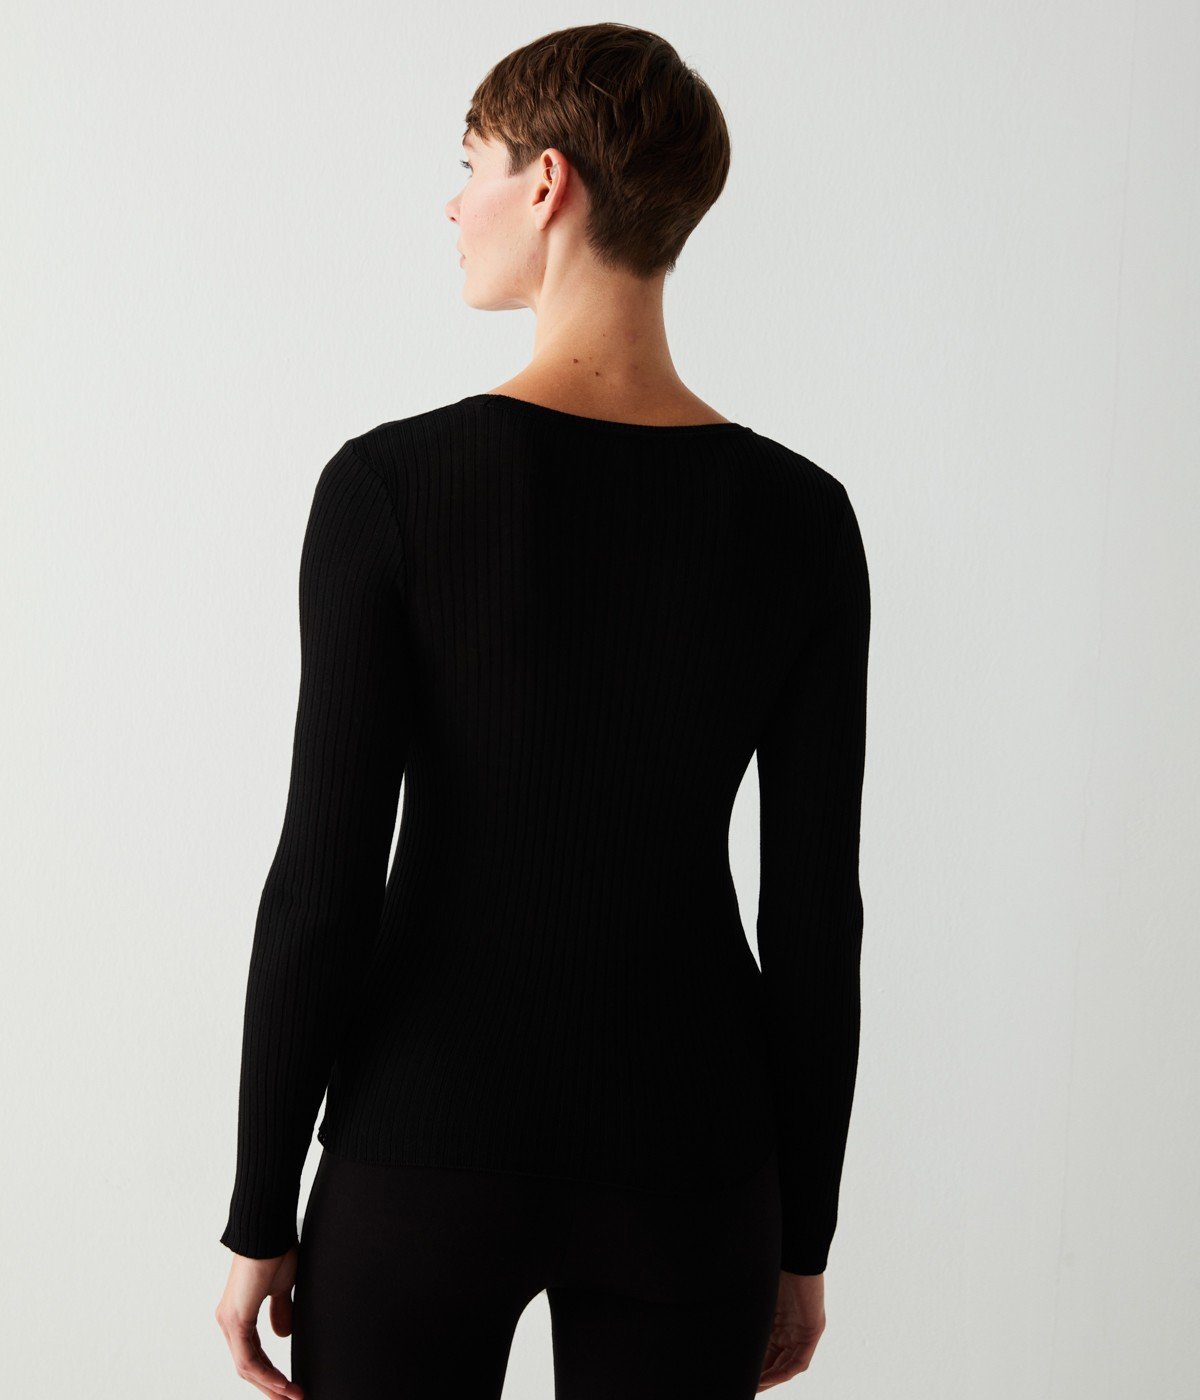 Tricot Top Long Armed Body